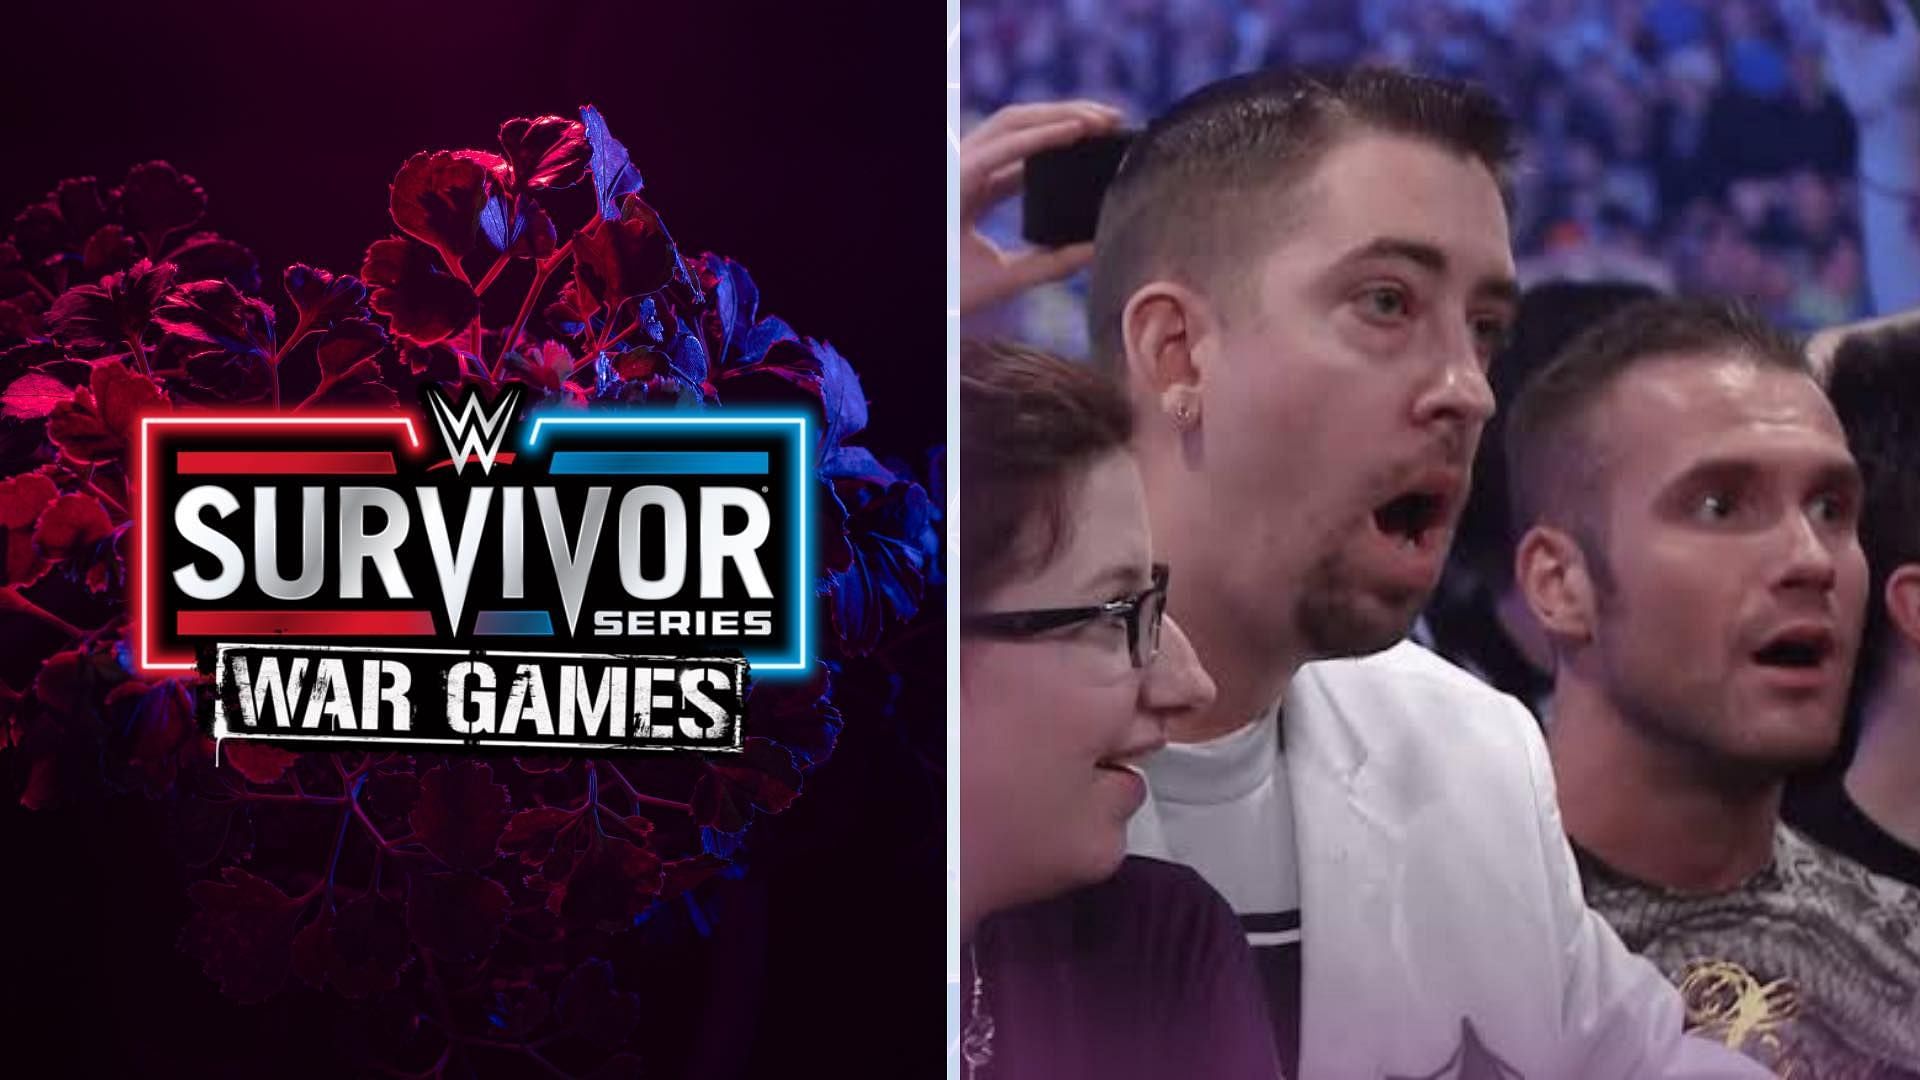 What surprises could be in store for the WWE Universe at Survivor Series?